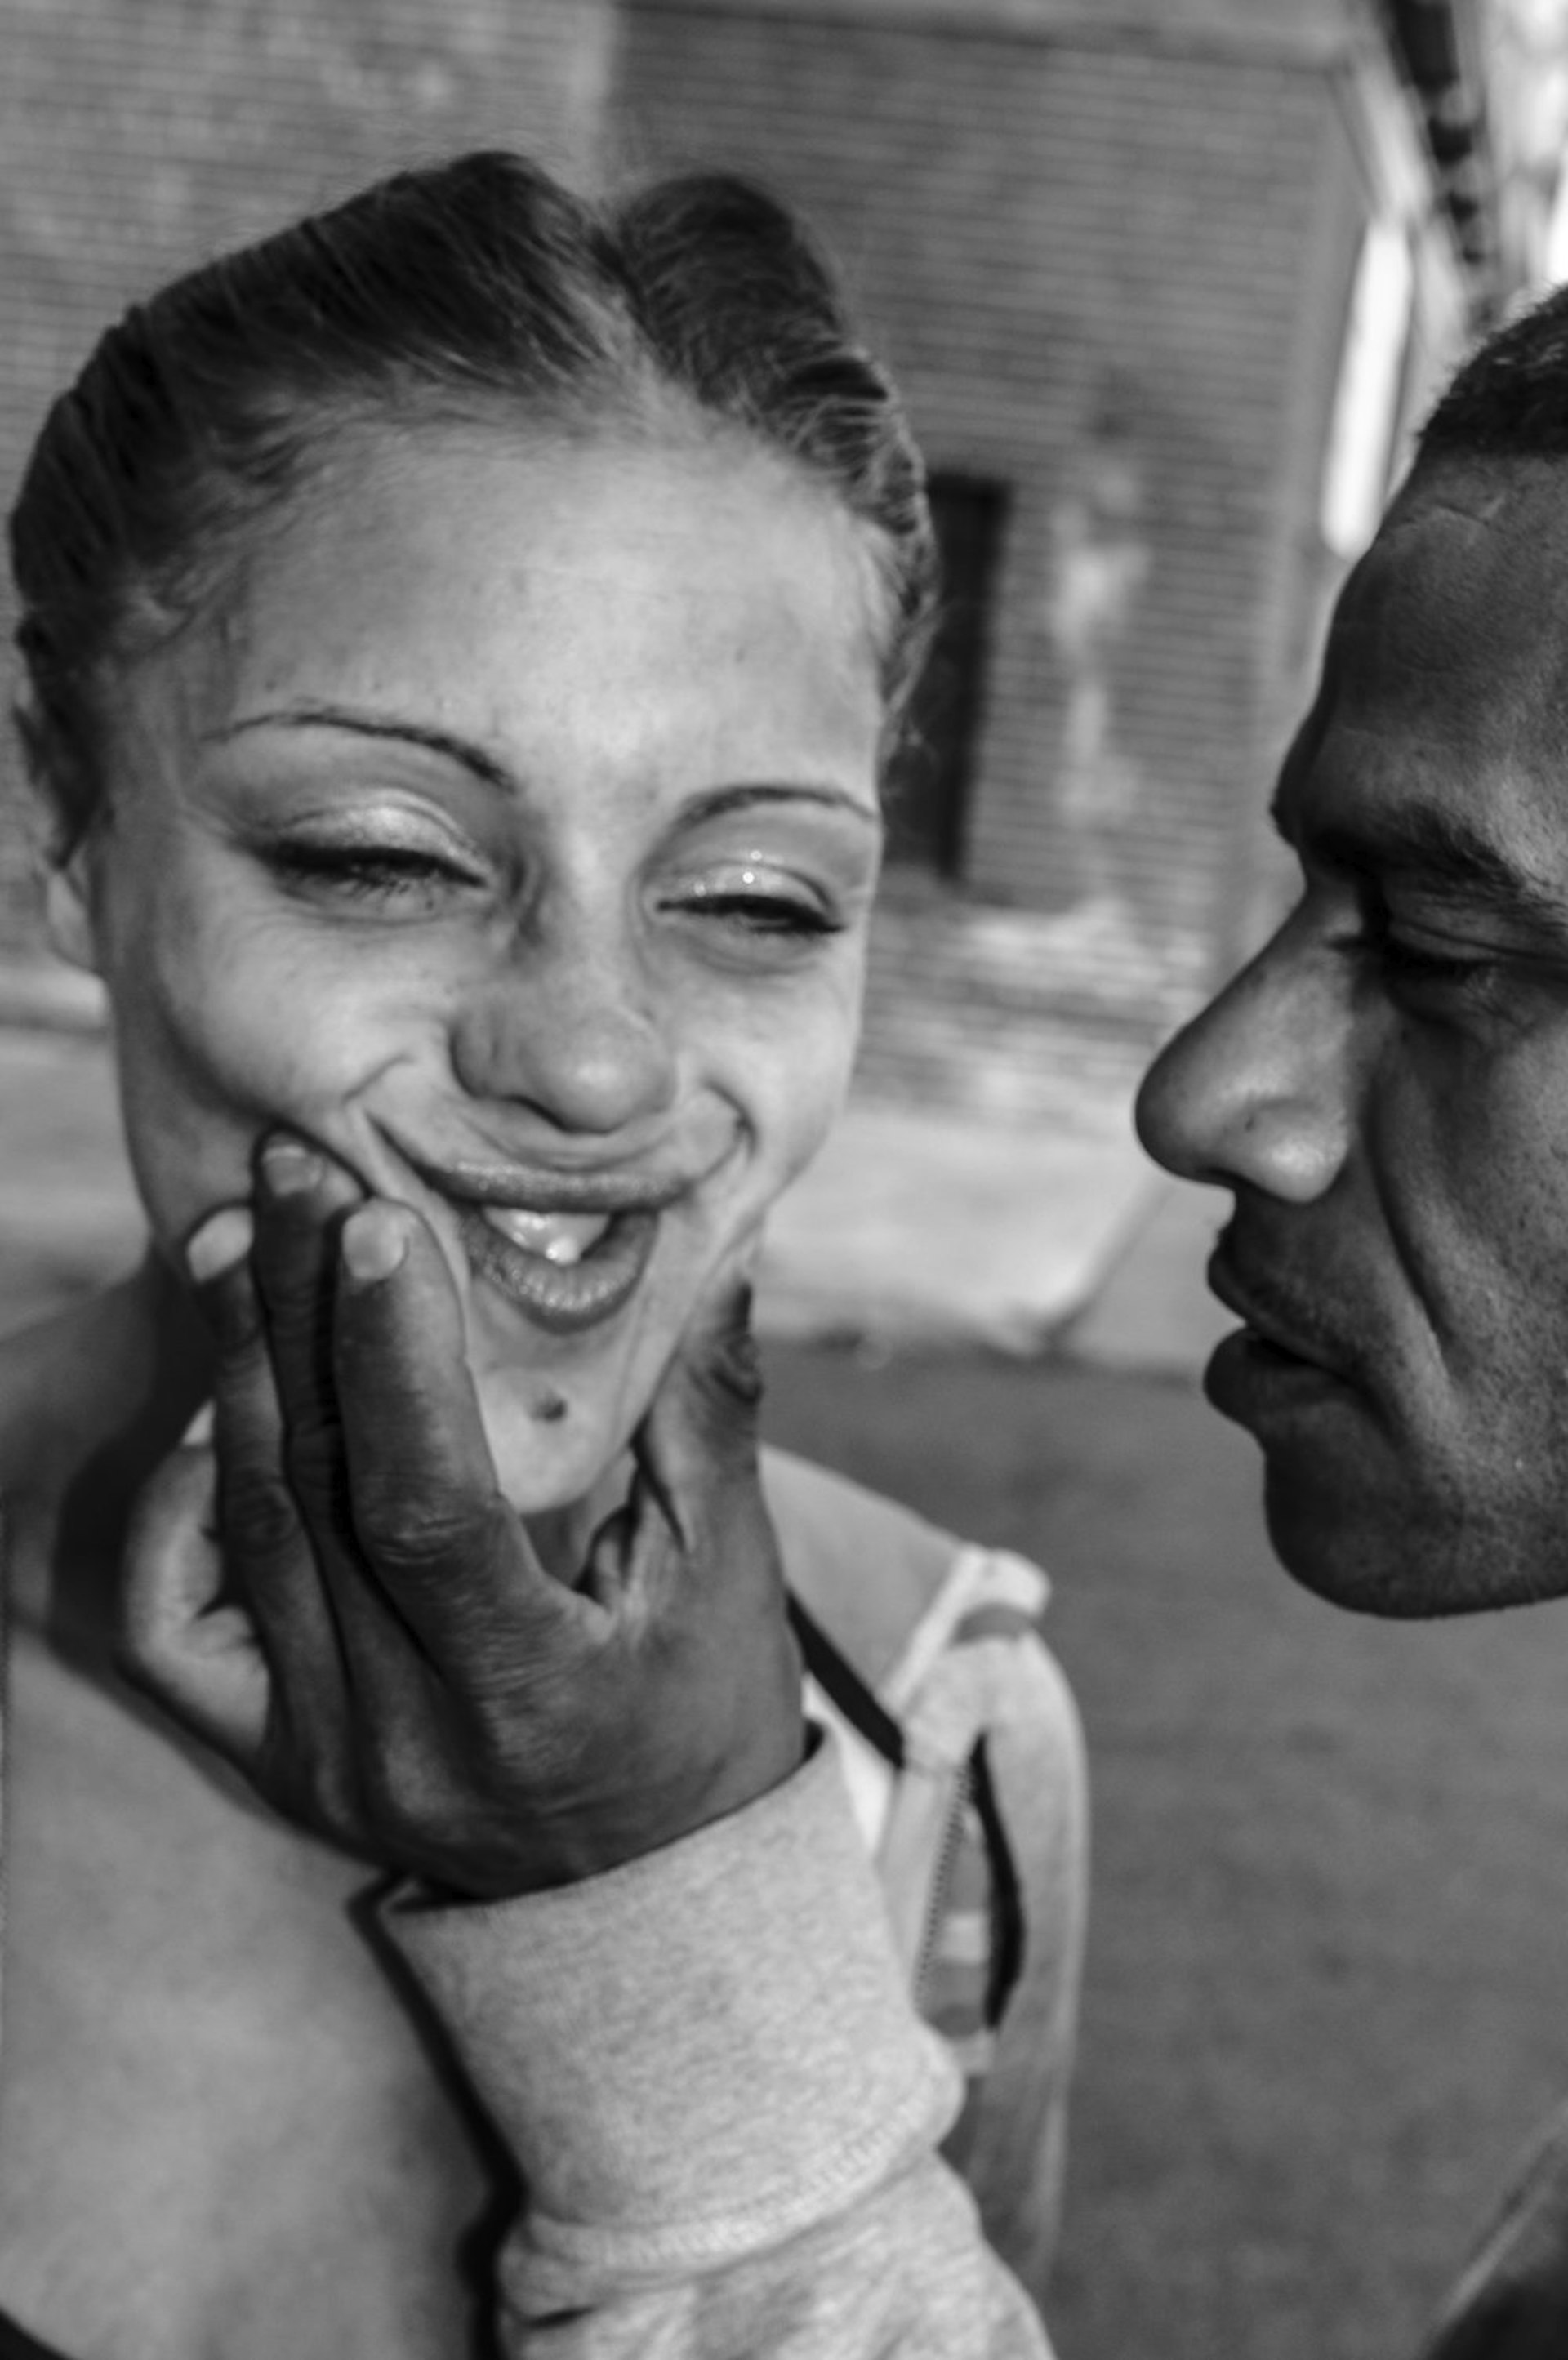 Capturing love and loss on the streets of Poughkeepsie